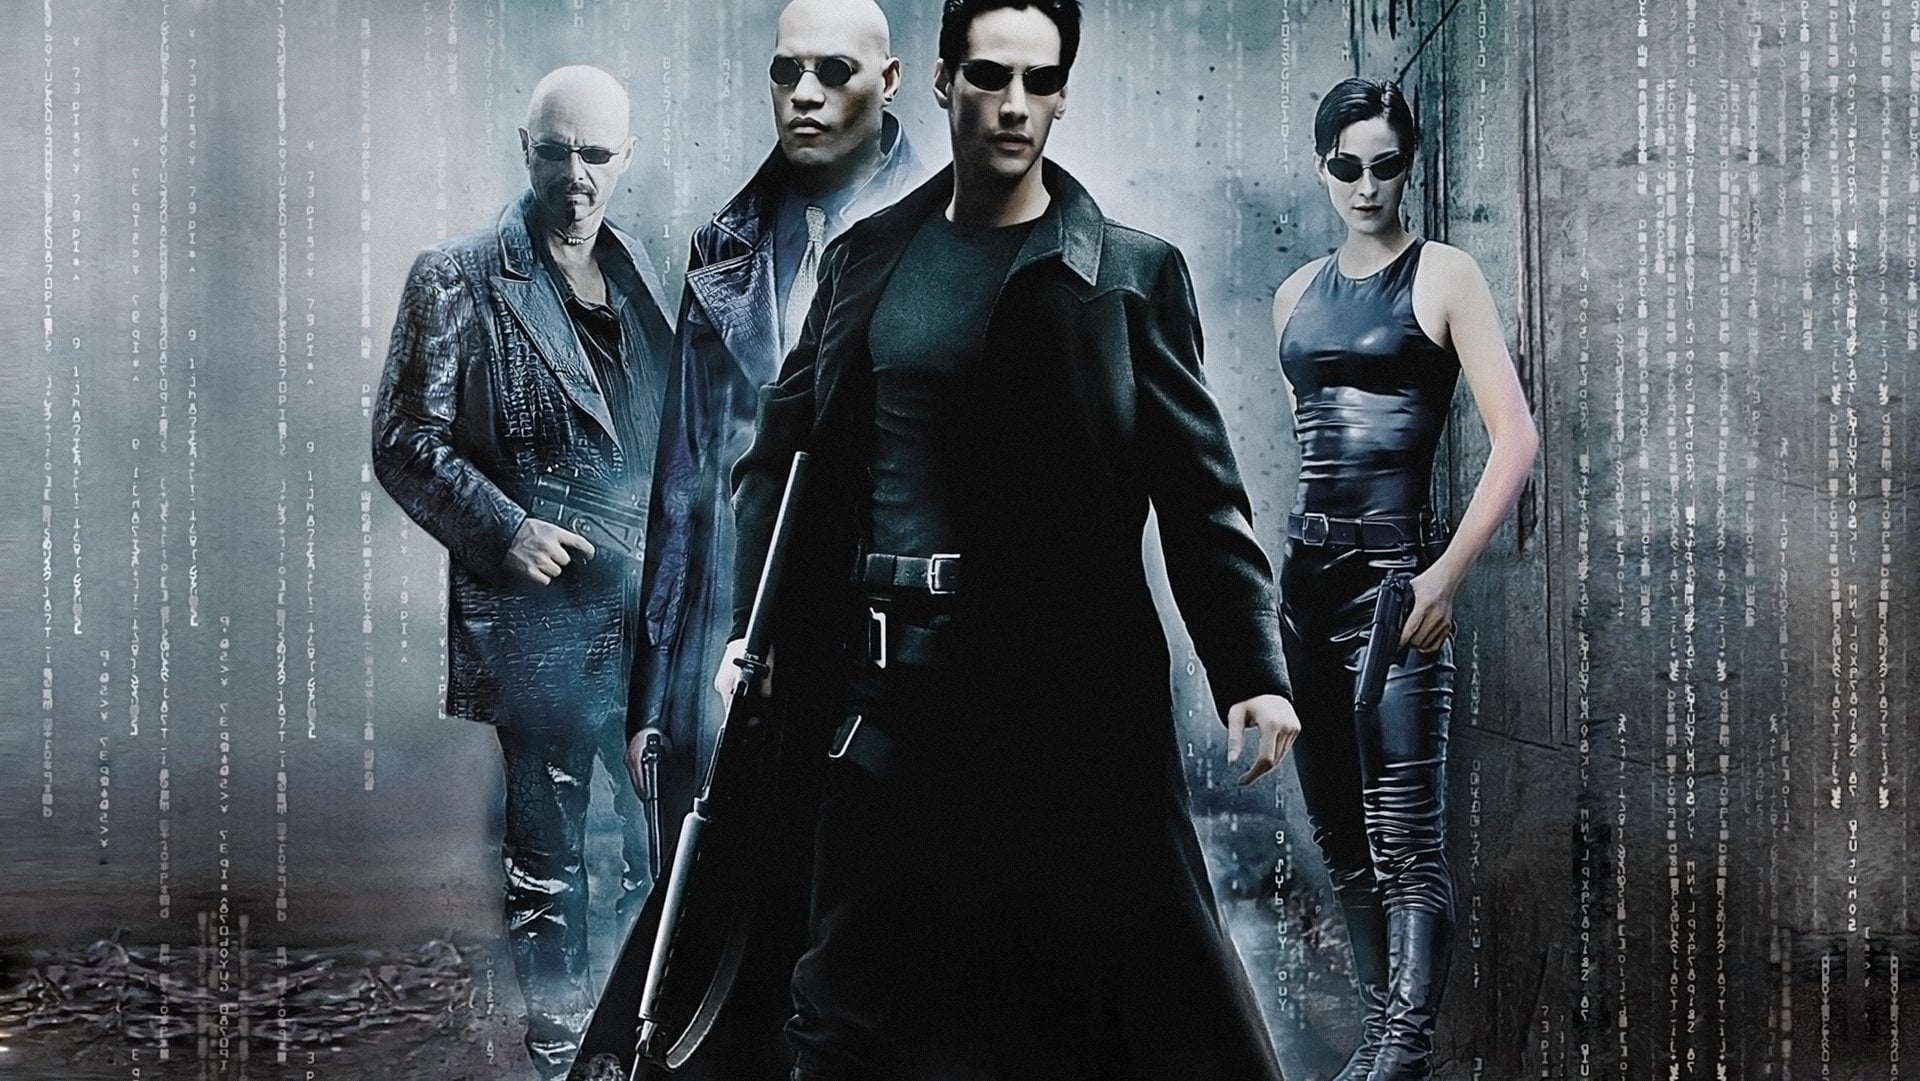 The Matrix, Carrie‑Anne Moss, Keanu Reeves, Laurence Fishburne